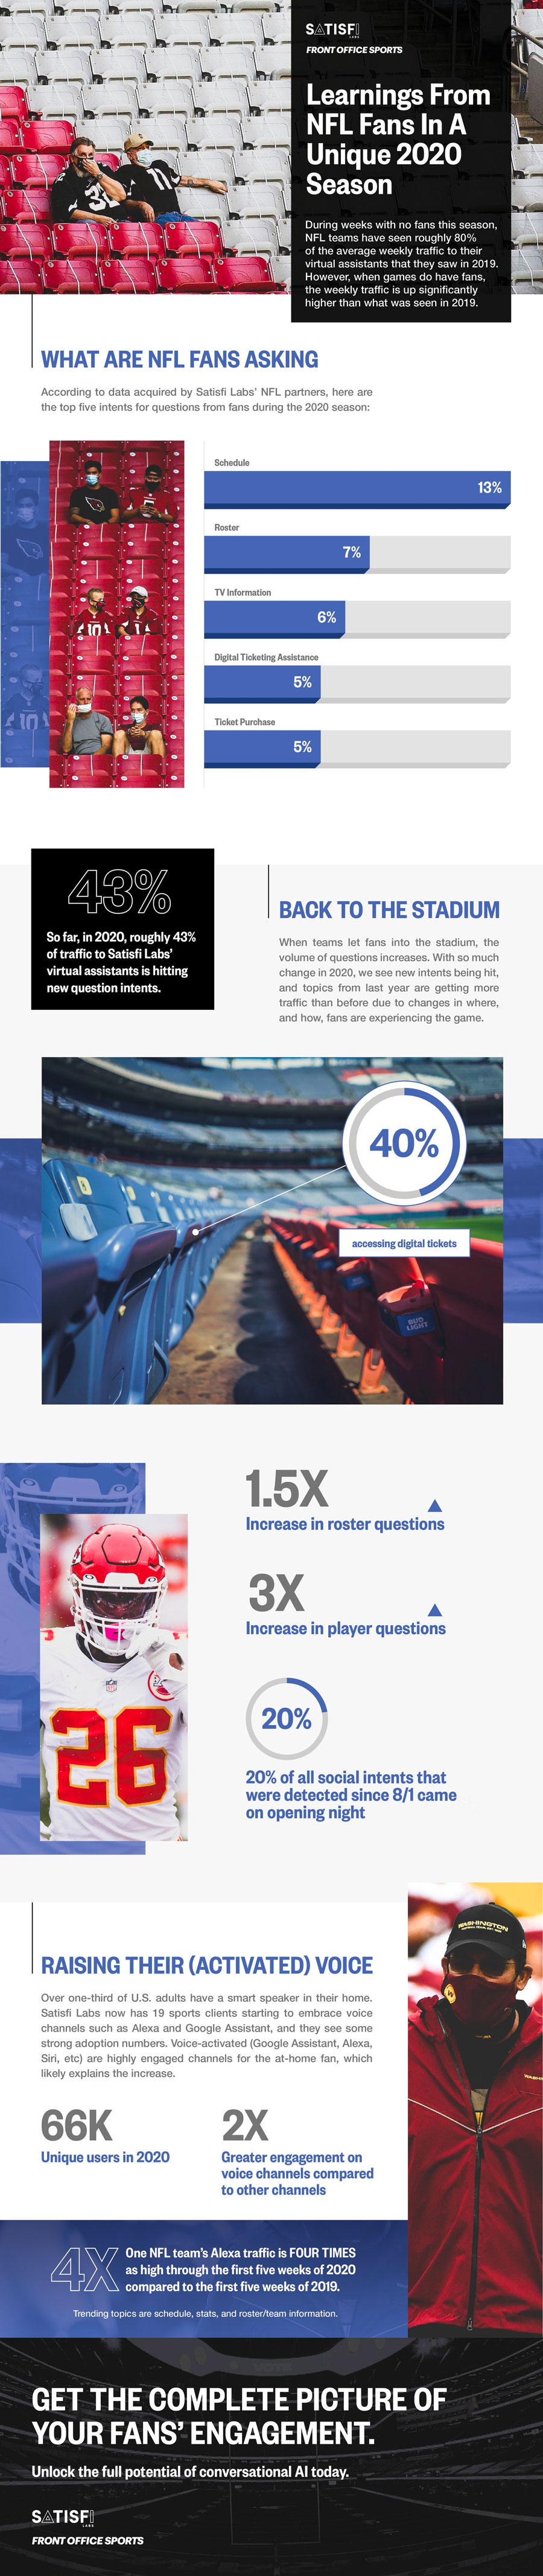 Learnings From NFL Fans In A Unique 2020 Season [Infographic]